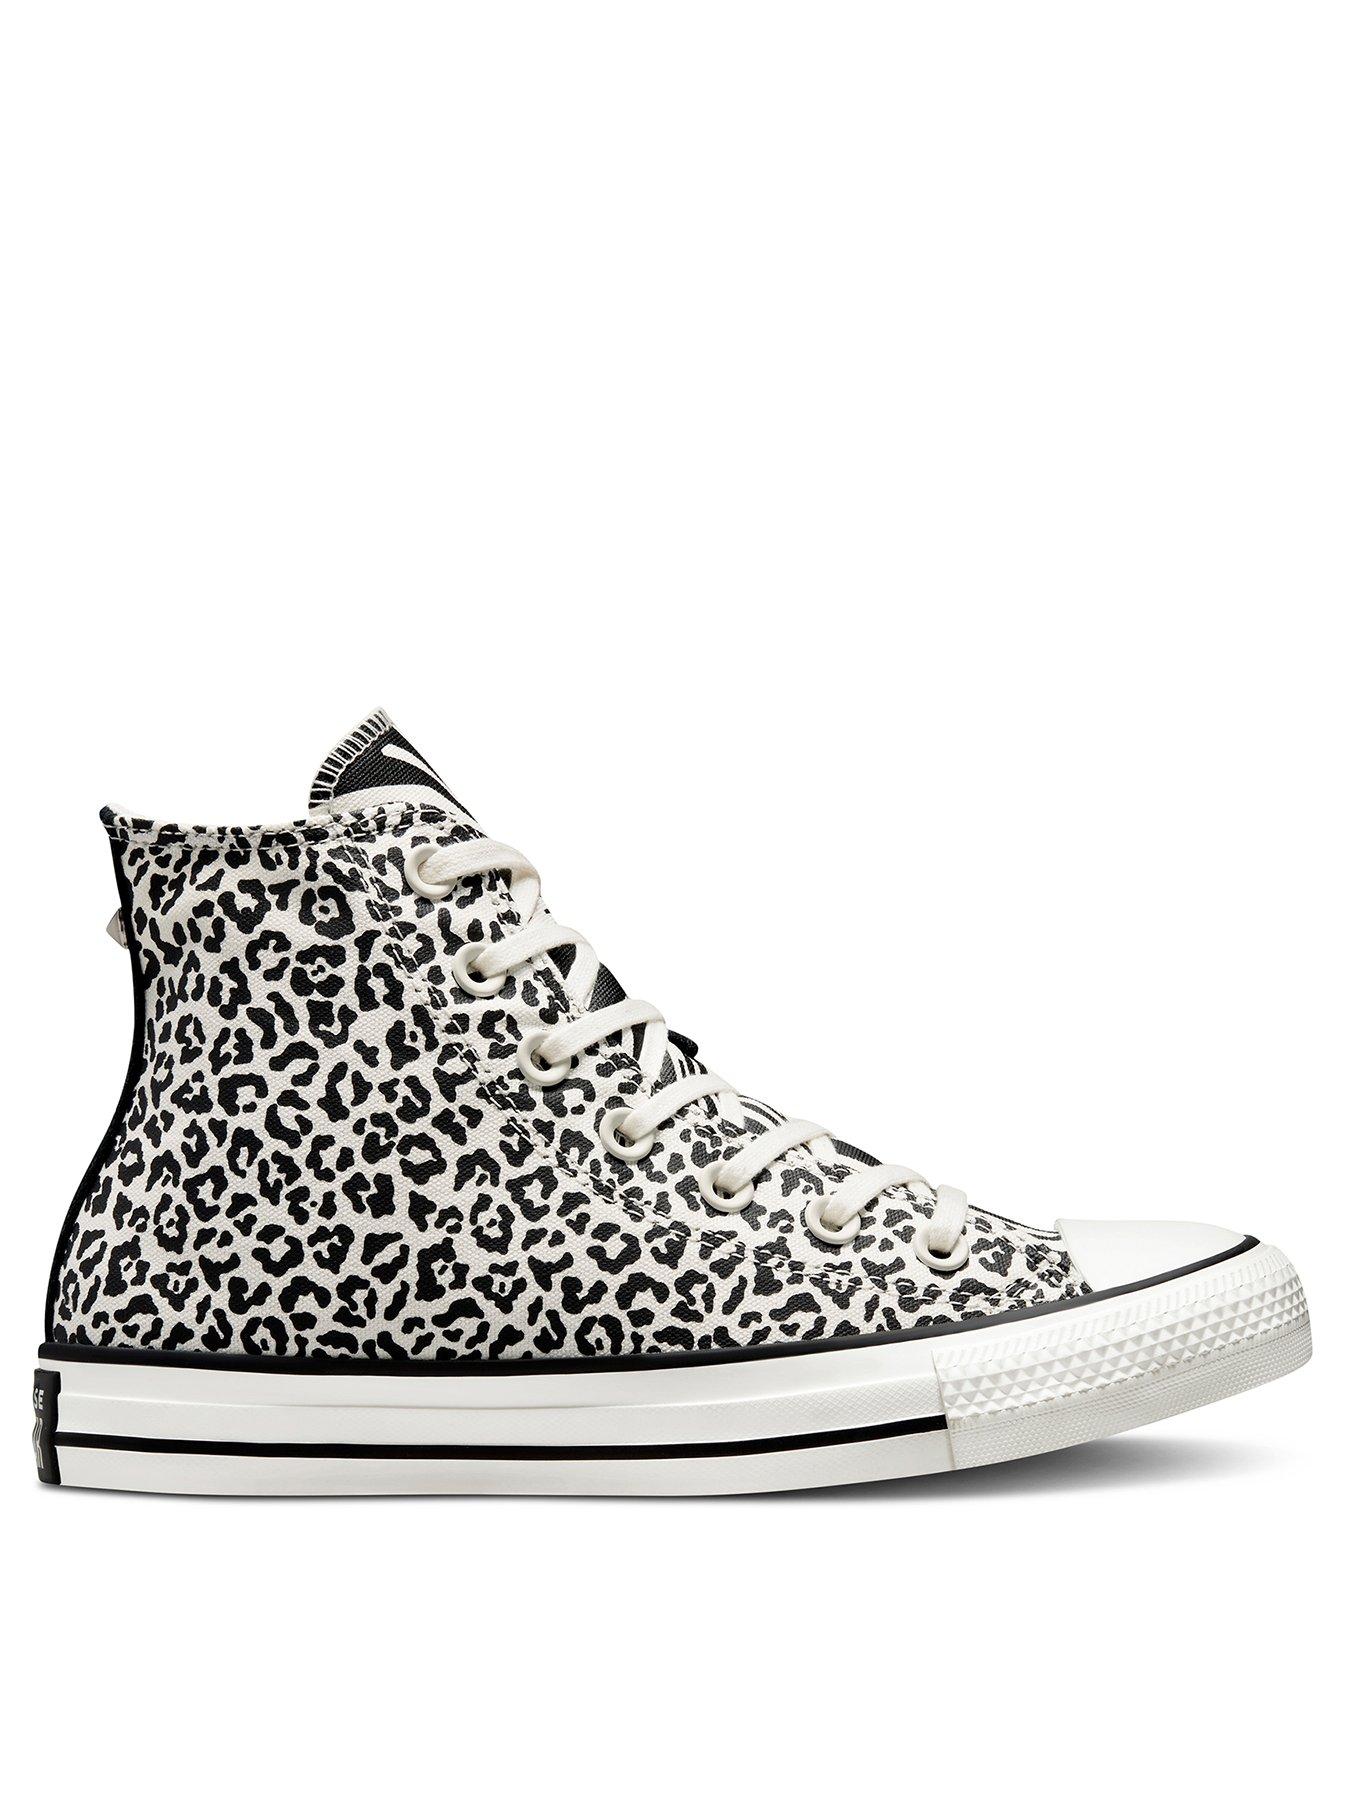 Converse Chuck Taylor Star Hi Top Trainers - Leopard Print | very.co.uk